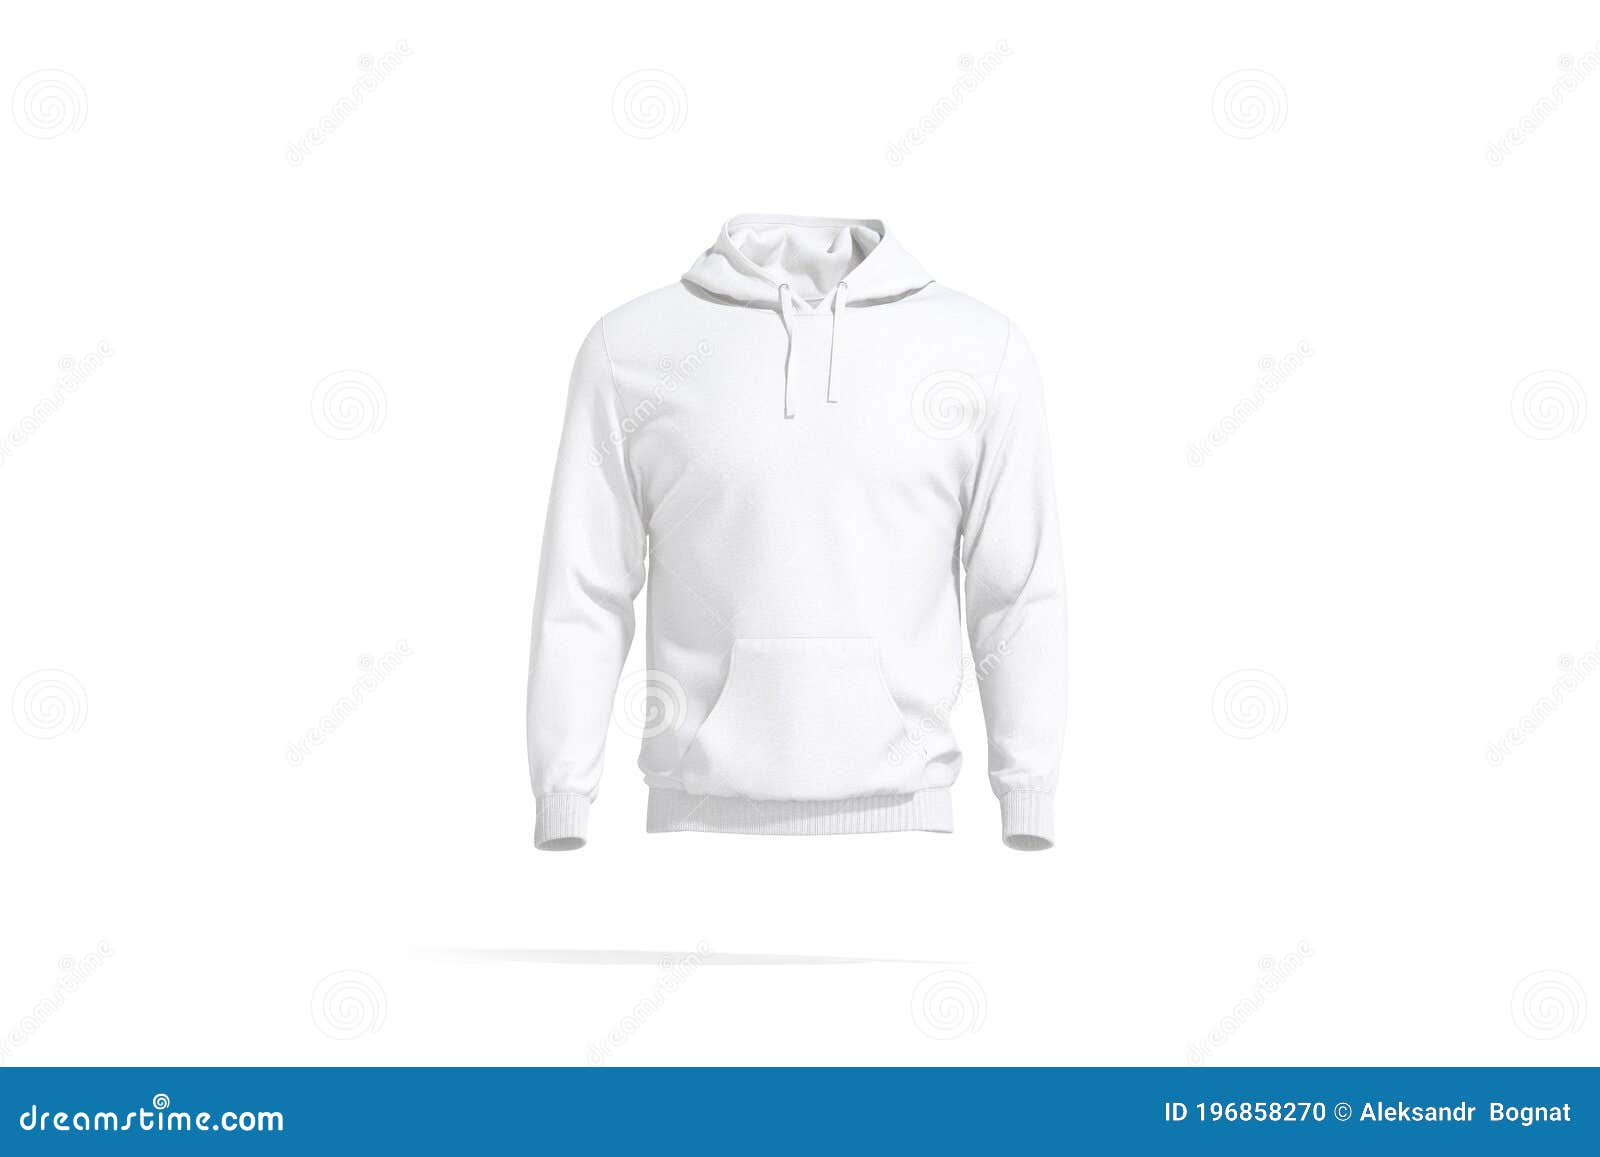 Download 45+ Basketball Heather Hoodie Mockup Front View Of Hooded ...